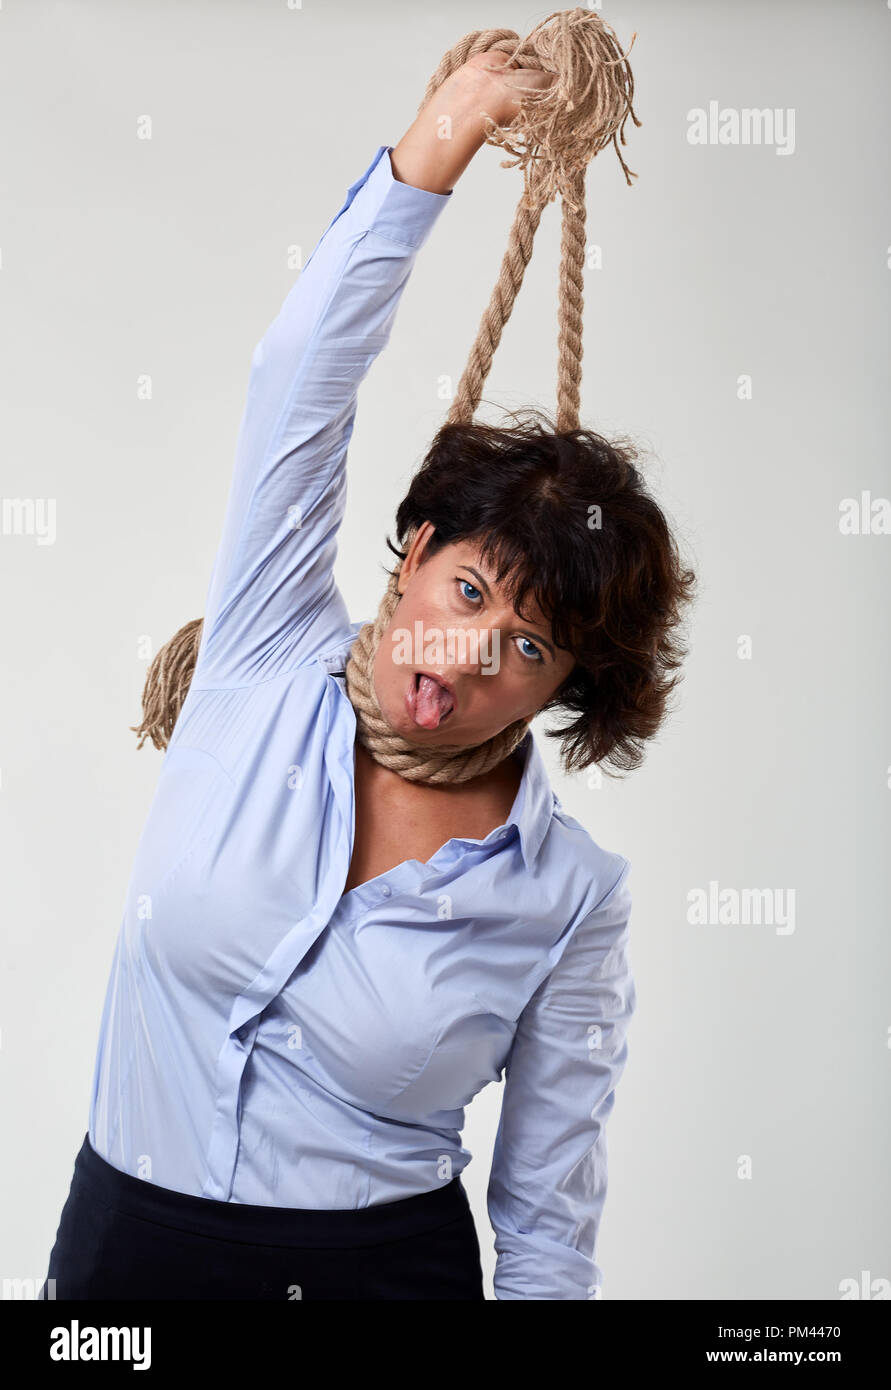 Mature businesswoman mimicking hanging herself out of stress Stock Photo